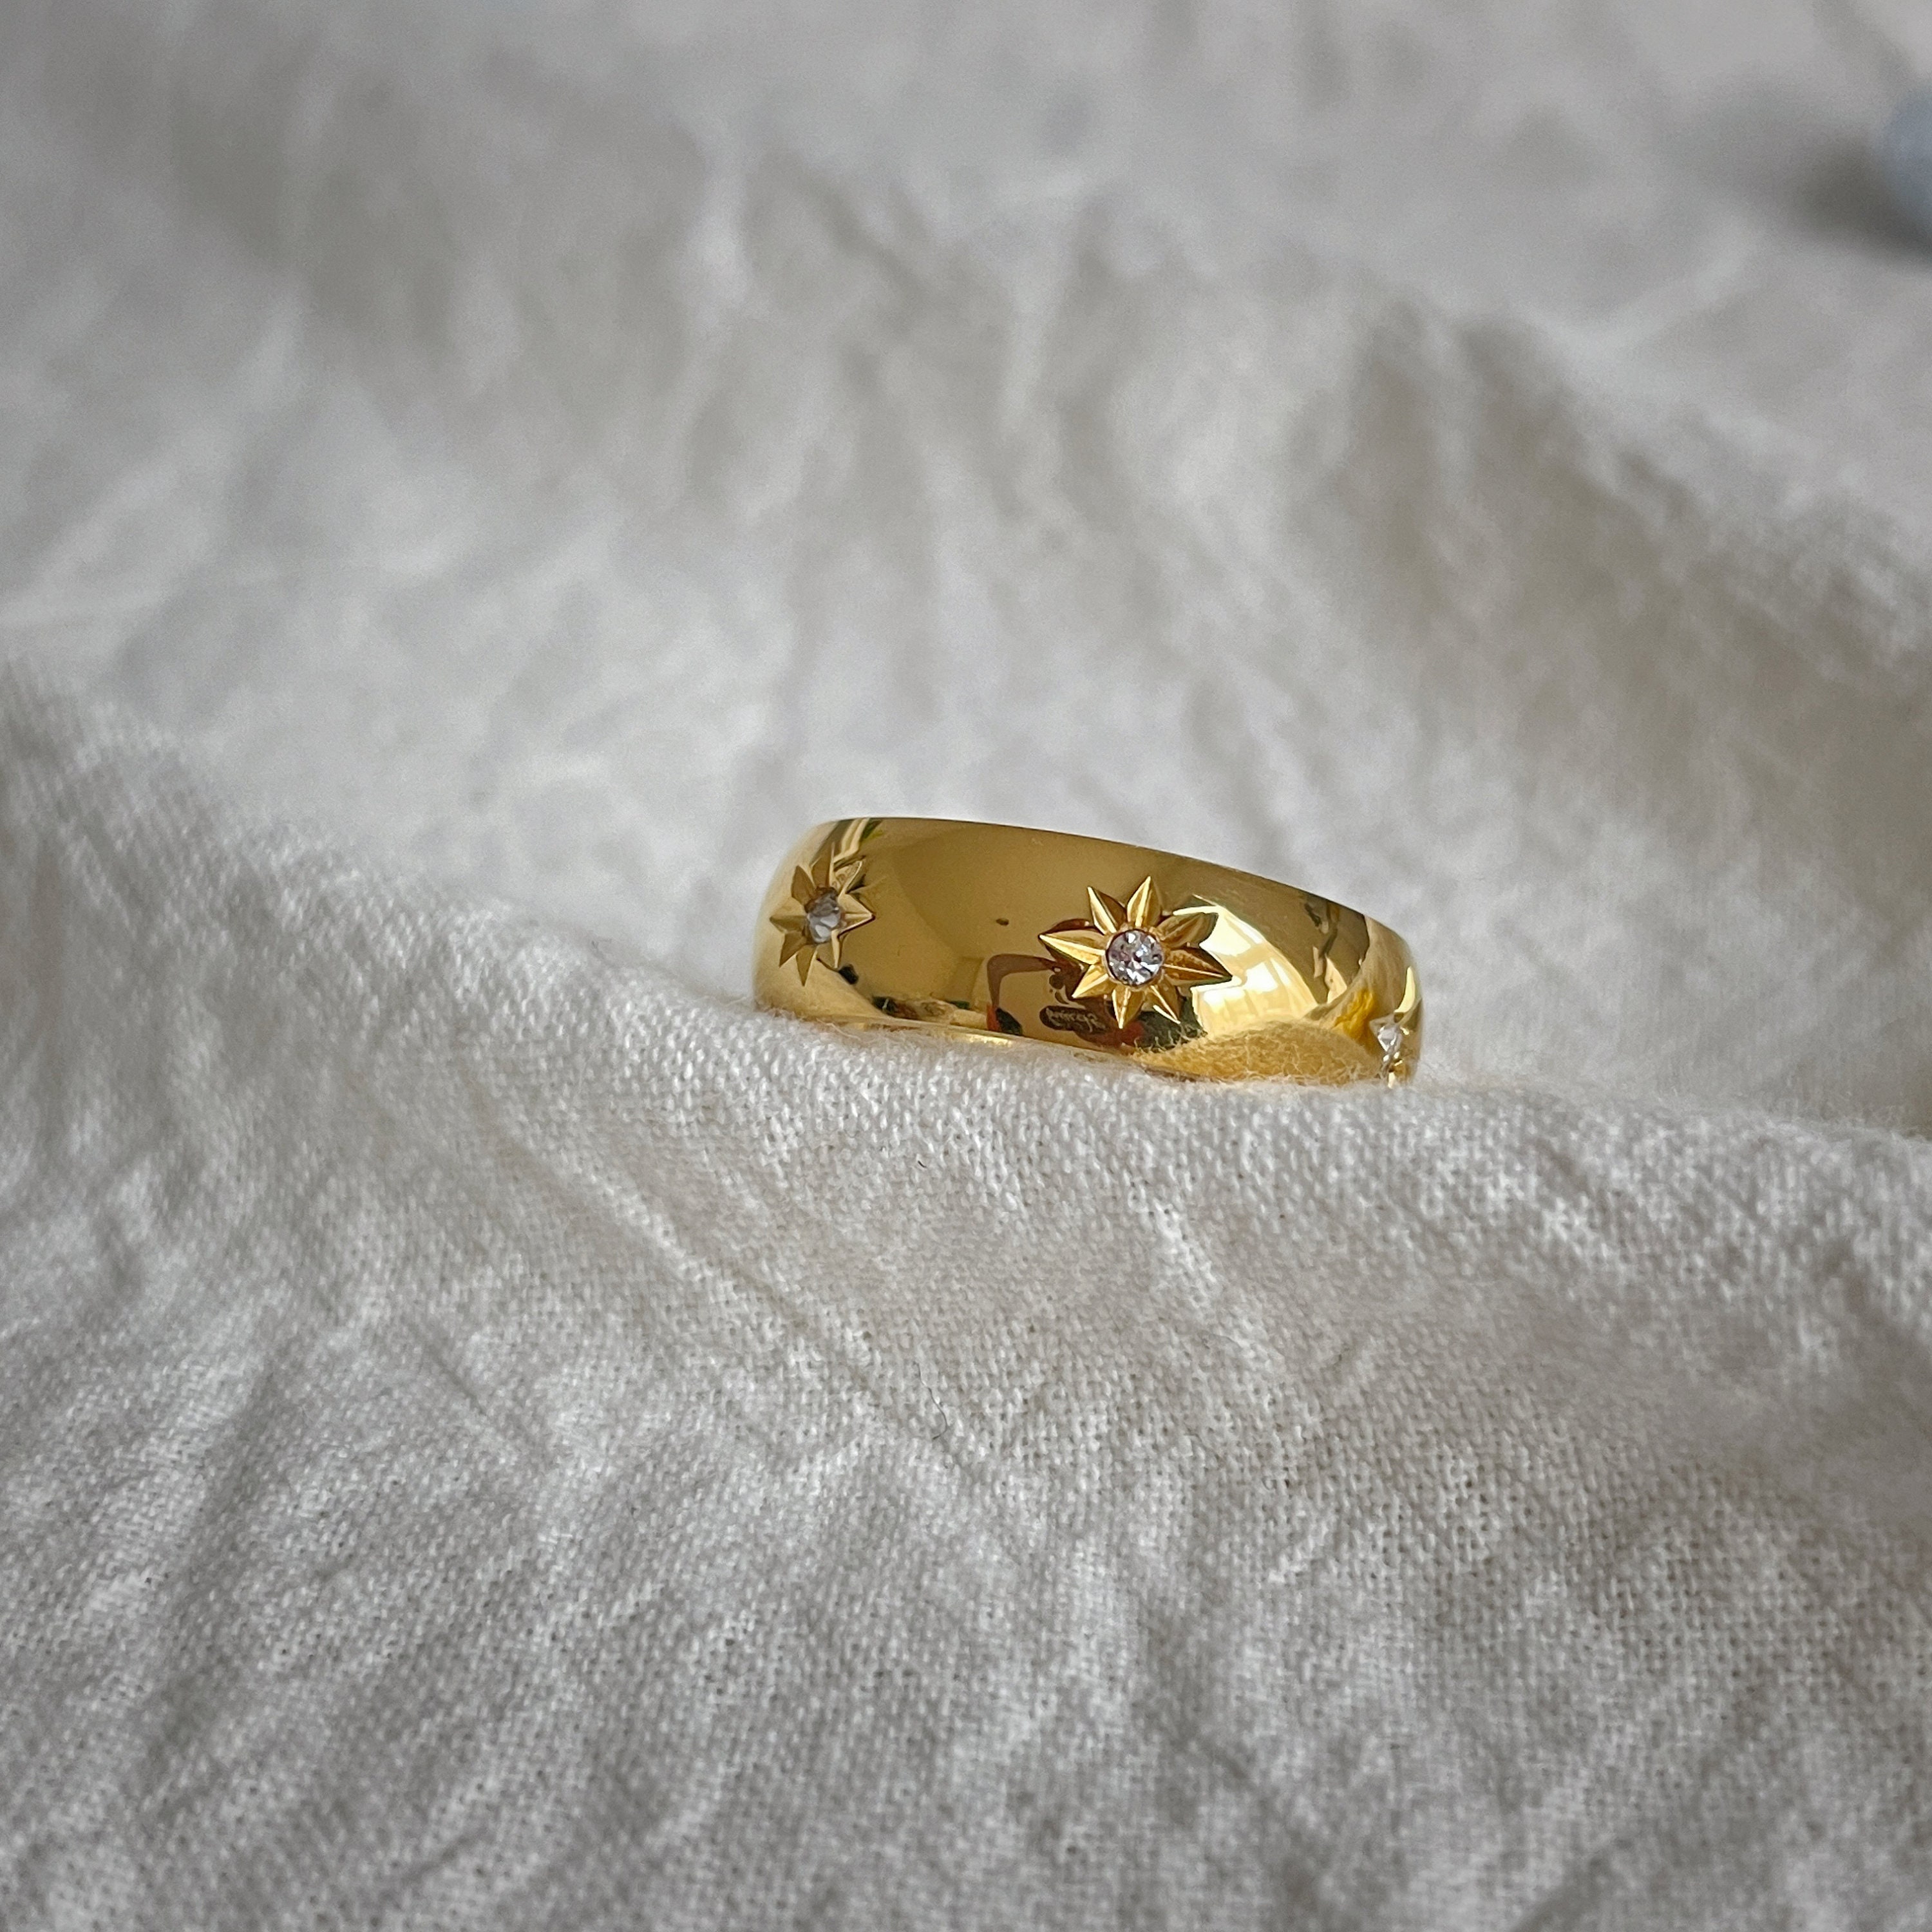 Pvd Gold Rings - Etsy